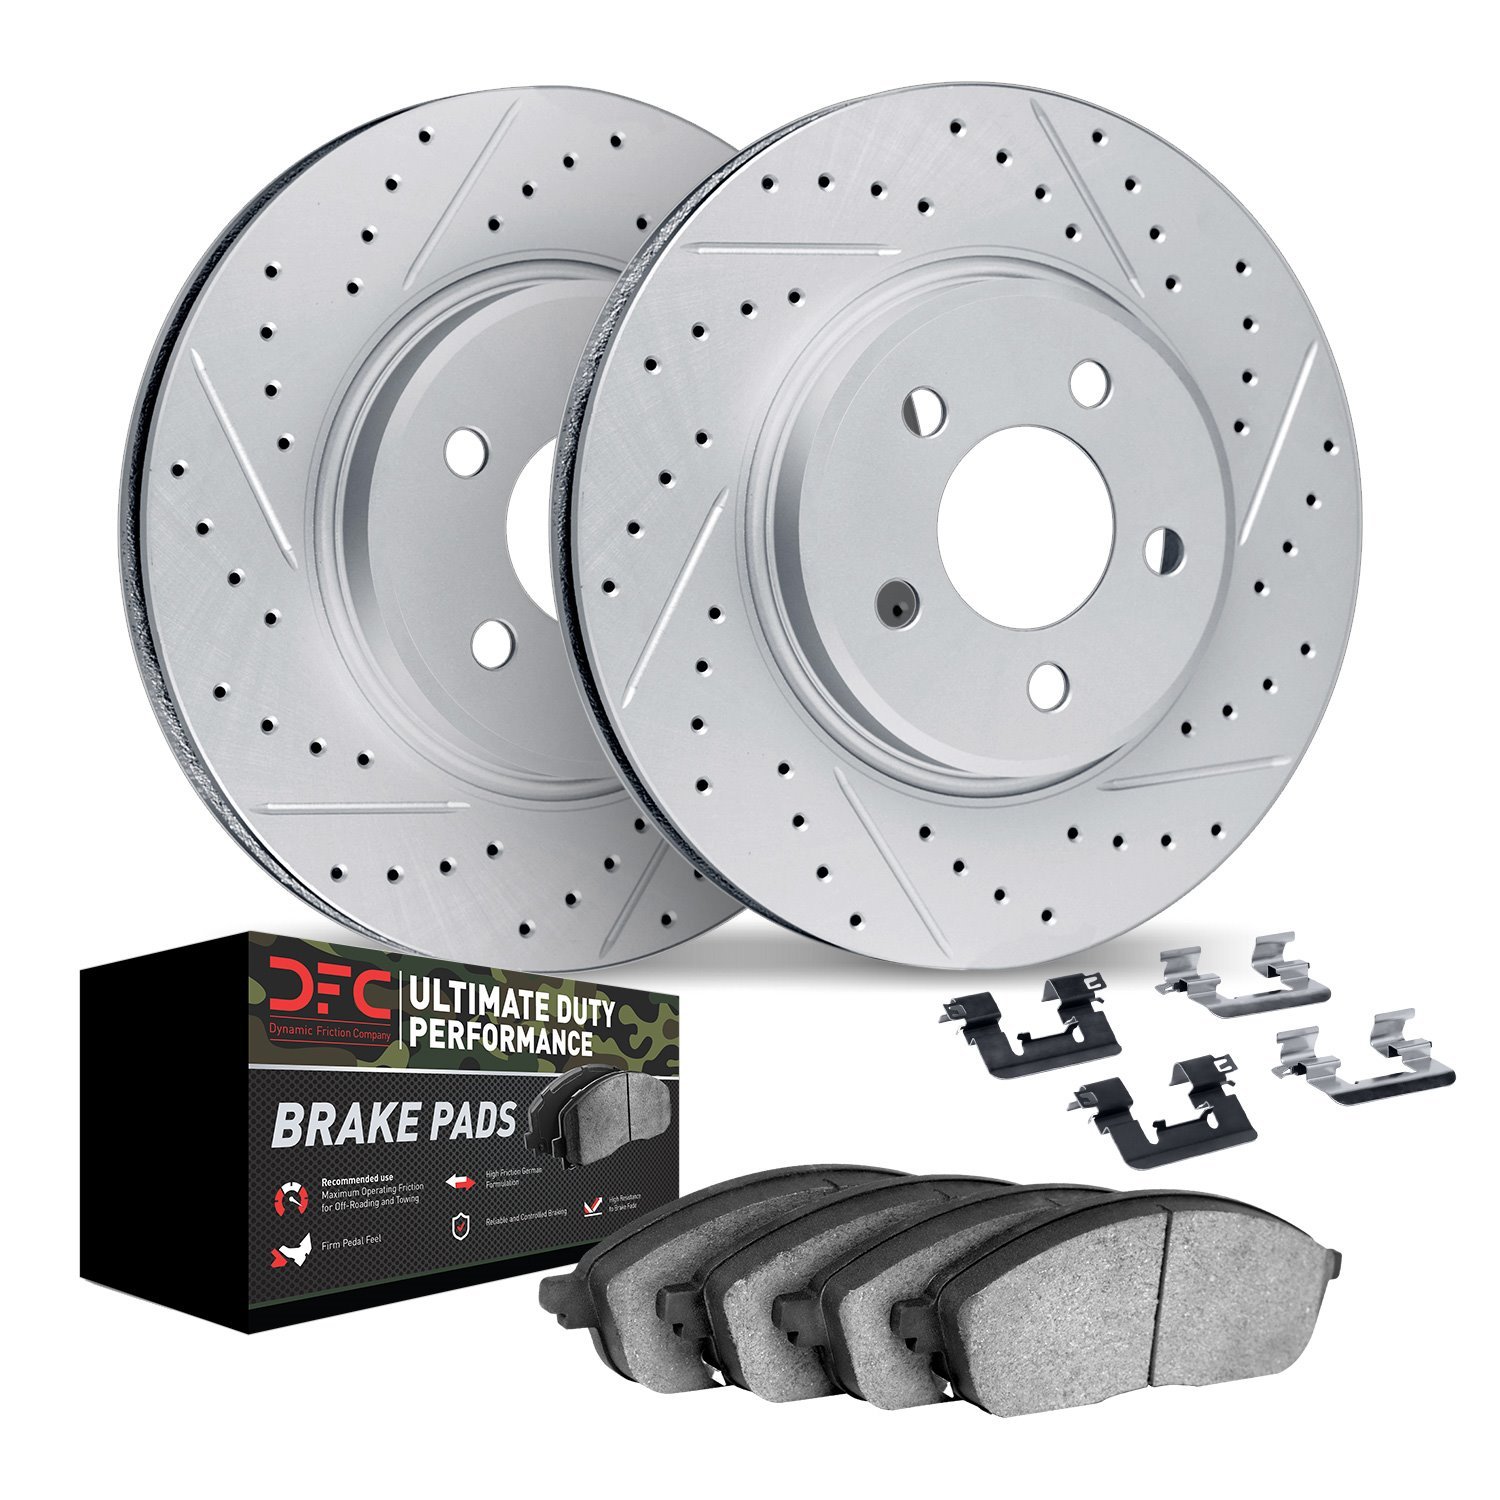 2412-54034 Geoperformance Drilled/Slotted Brake Rotors with Ultimate-Duty Brake Pads Kit & Hardware, 2003-2011 Ford/Lincoln/Merc